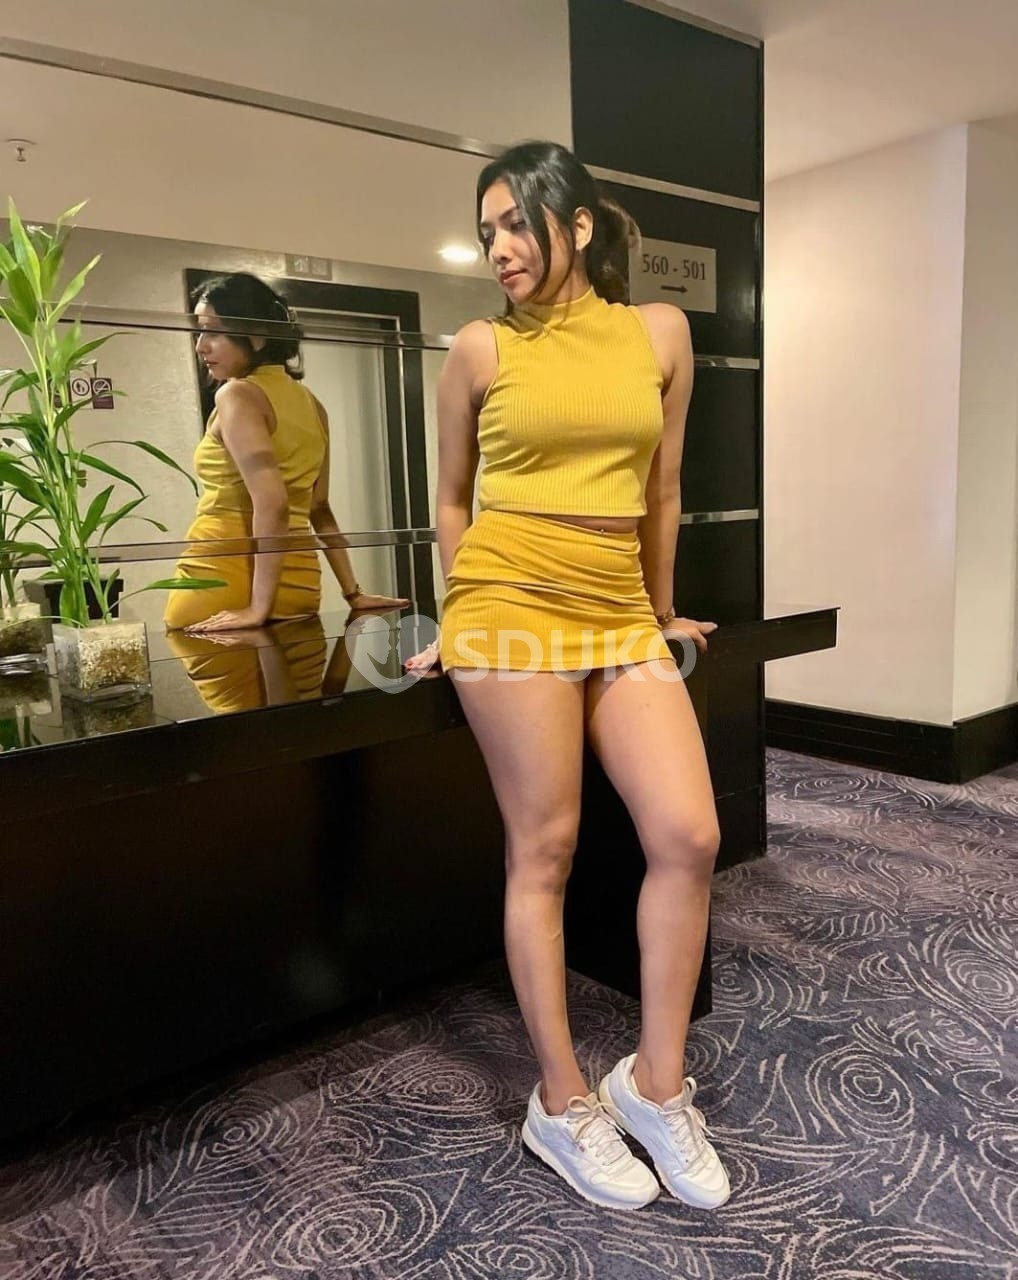 HISAR VIP ♥️⭐️ INDEPENDENT COLLEGE GIRL AVAILABLE FULL ENJOY⭐️